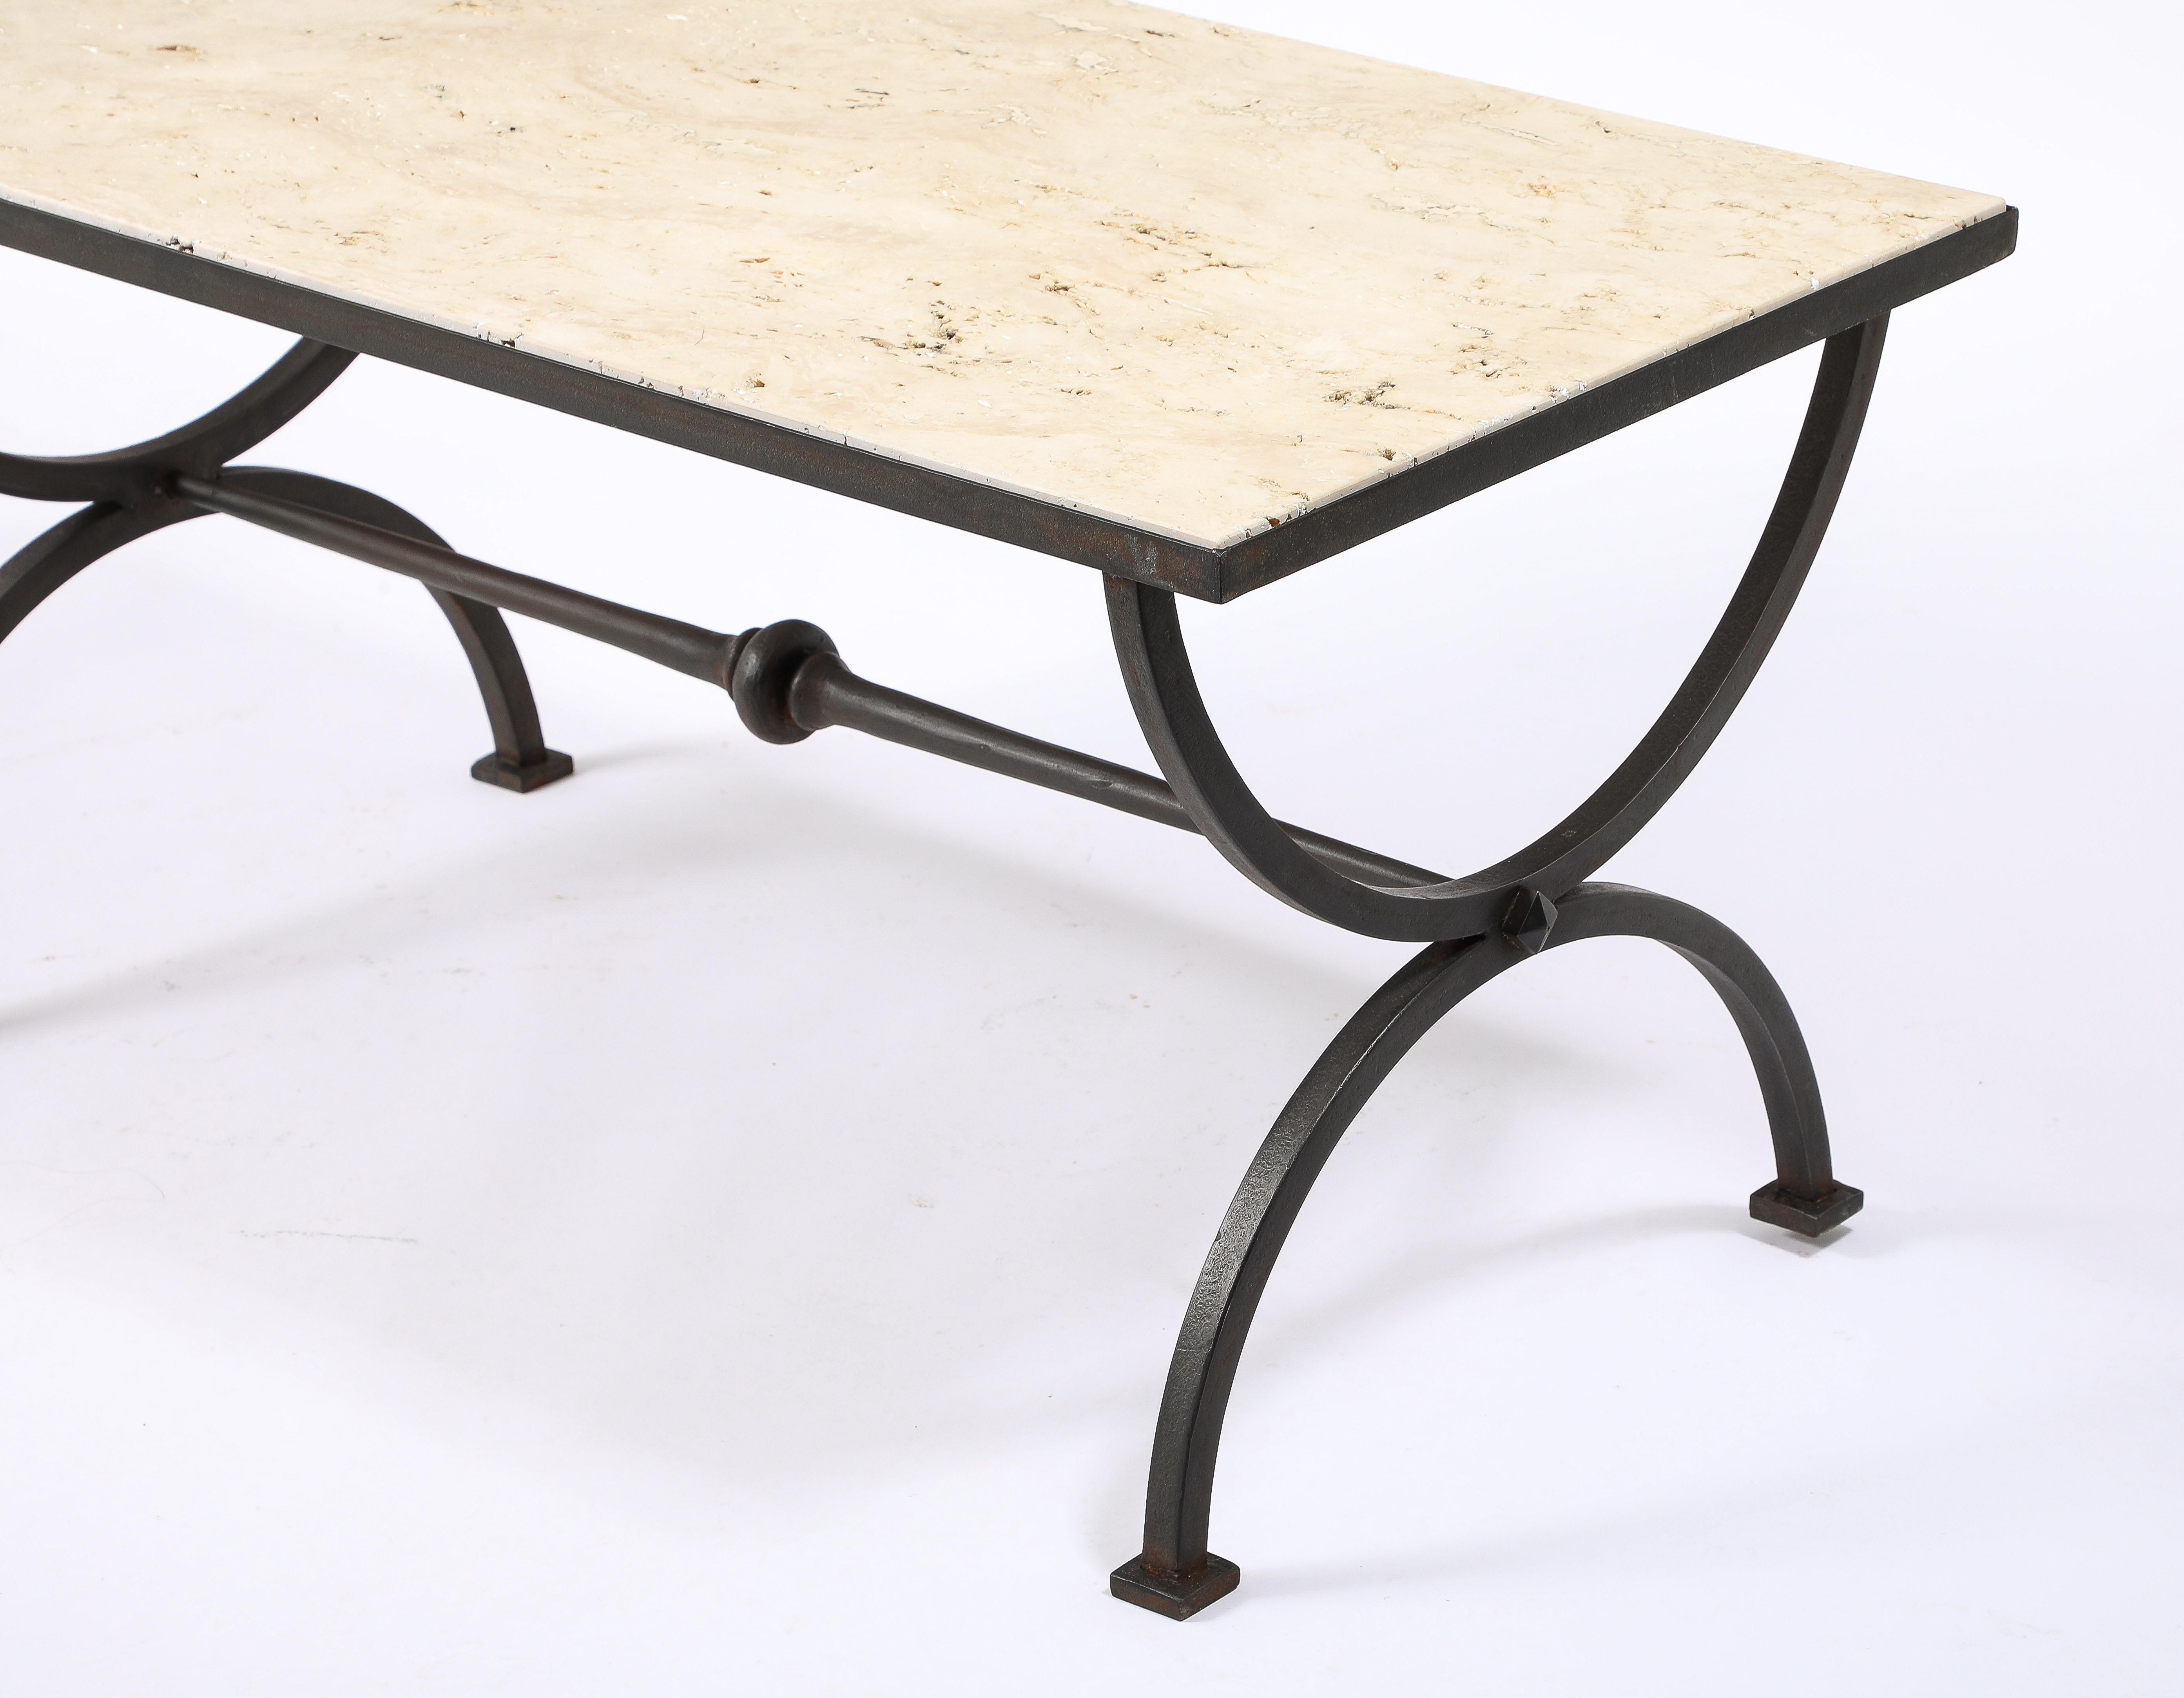 Travertin Marble & Wrought Iron Coffee Table, France 1940's In Good Condition For Sale In New York, NY